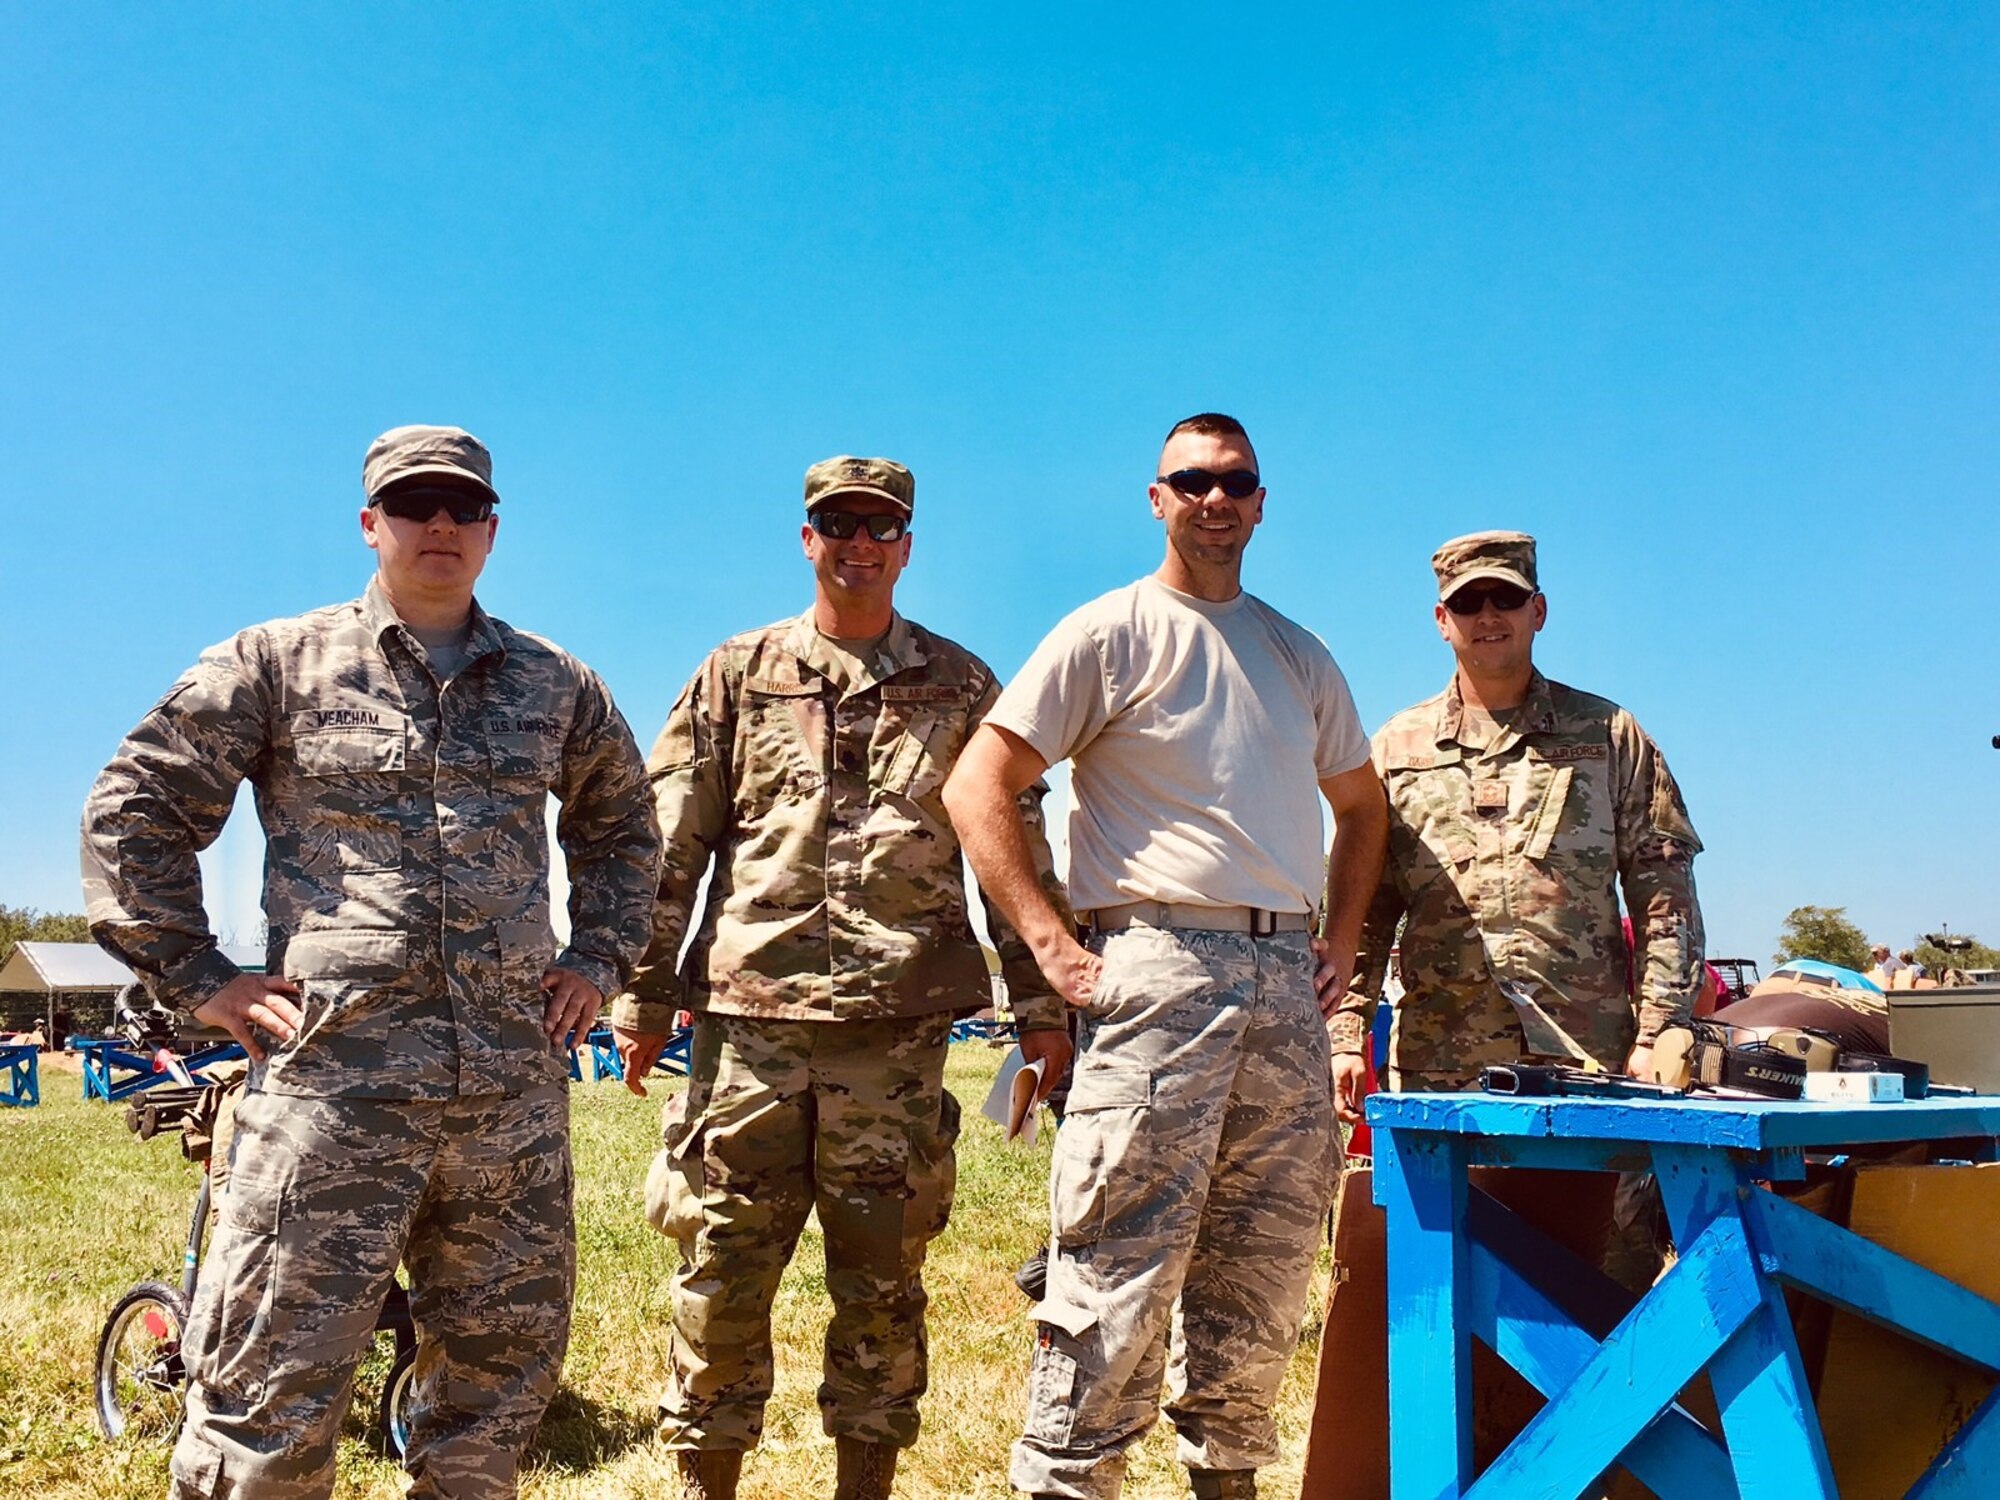 167th Airlift Wing marksman team members Staff Sgt. Derek Meacham, Master Sgt. Garey Diefenderfer, Master Sgt. James Barton and Senior Master Sgt. Michael Darby, participated in the National Matches at Camp Perry, July 2019. The month-long national shooting festival hosts more than 6,000 military and civilian participants who train and compete in a variety of competition including traditional pistol, smallbore, high-power rifle and long-range rifle.